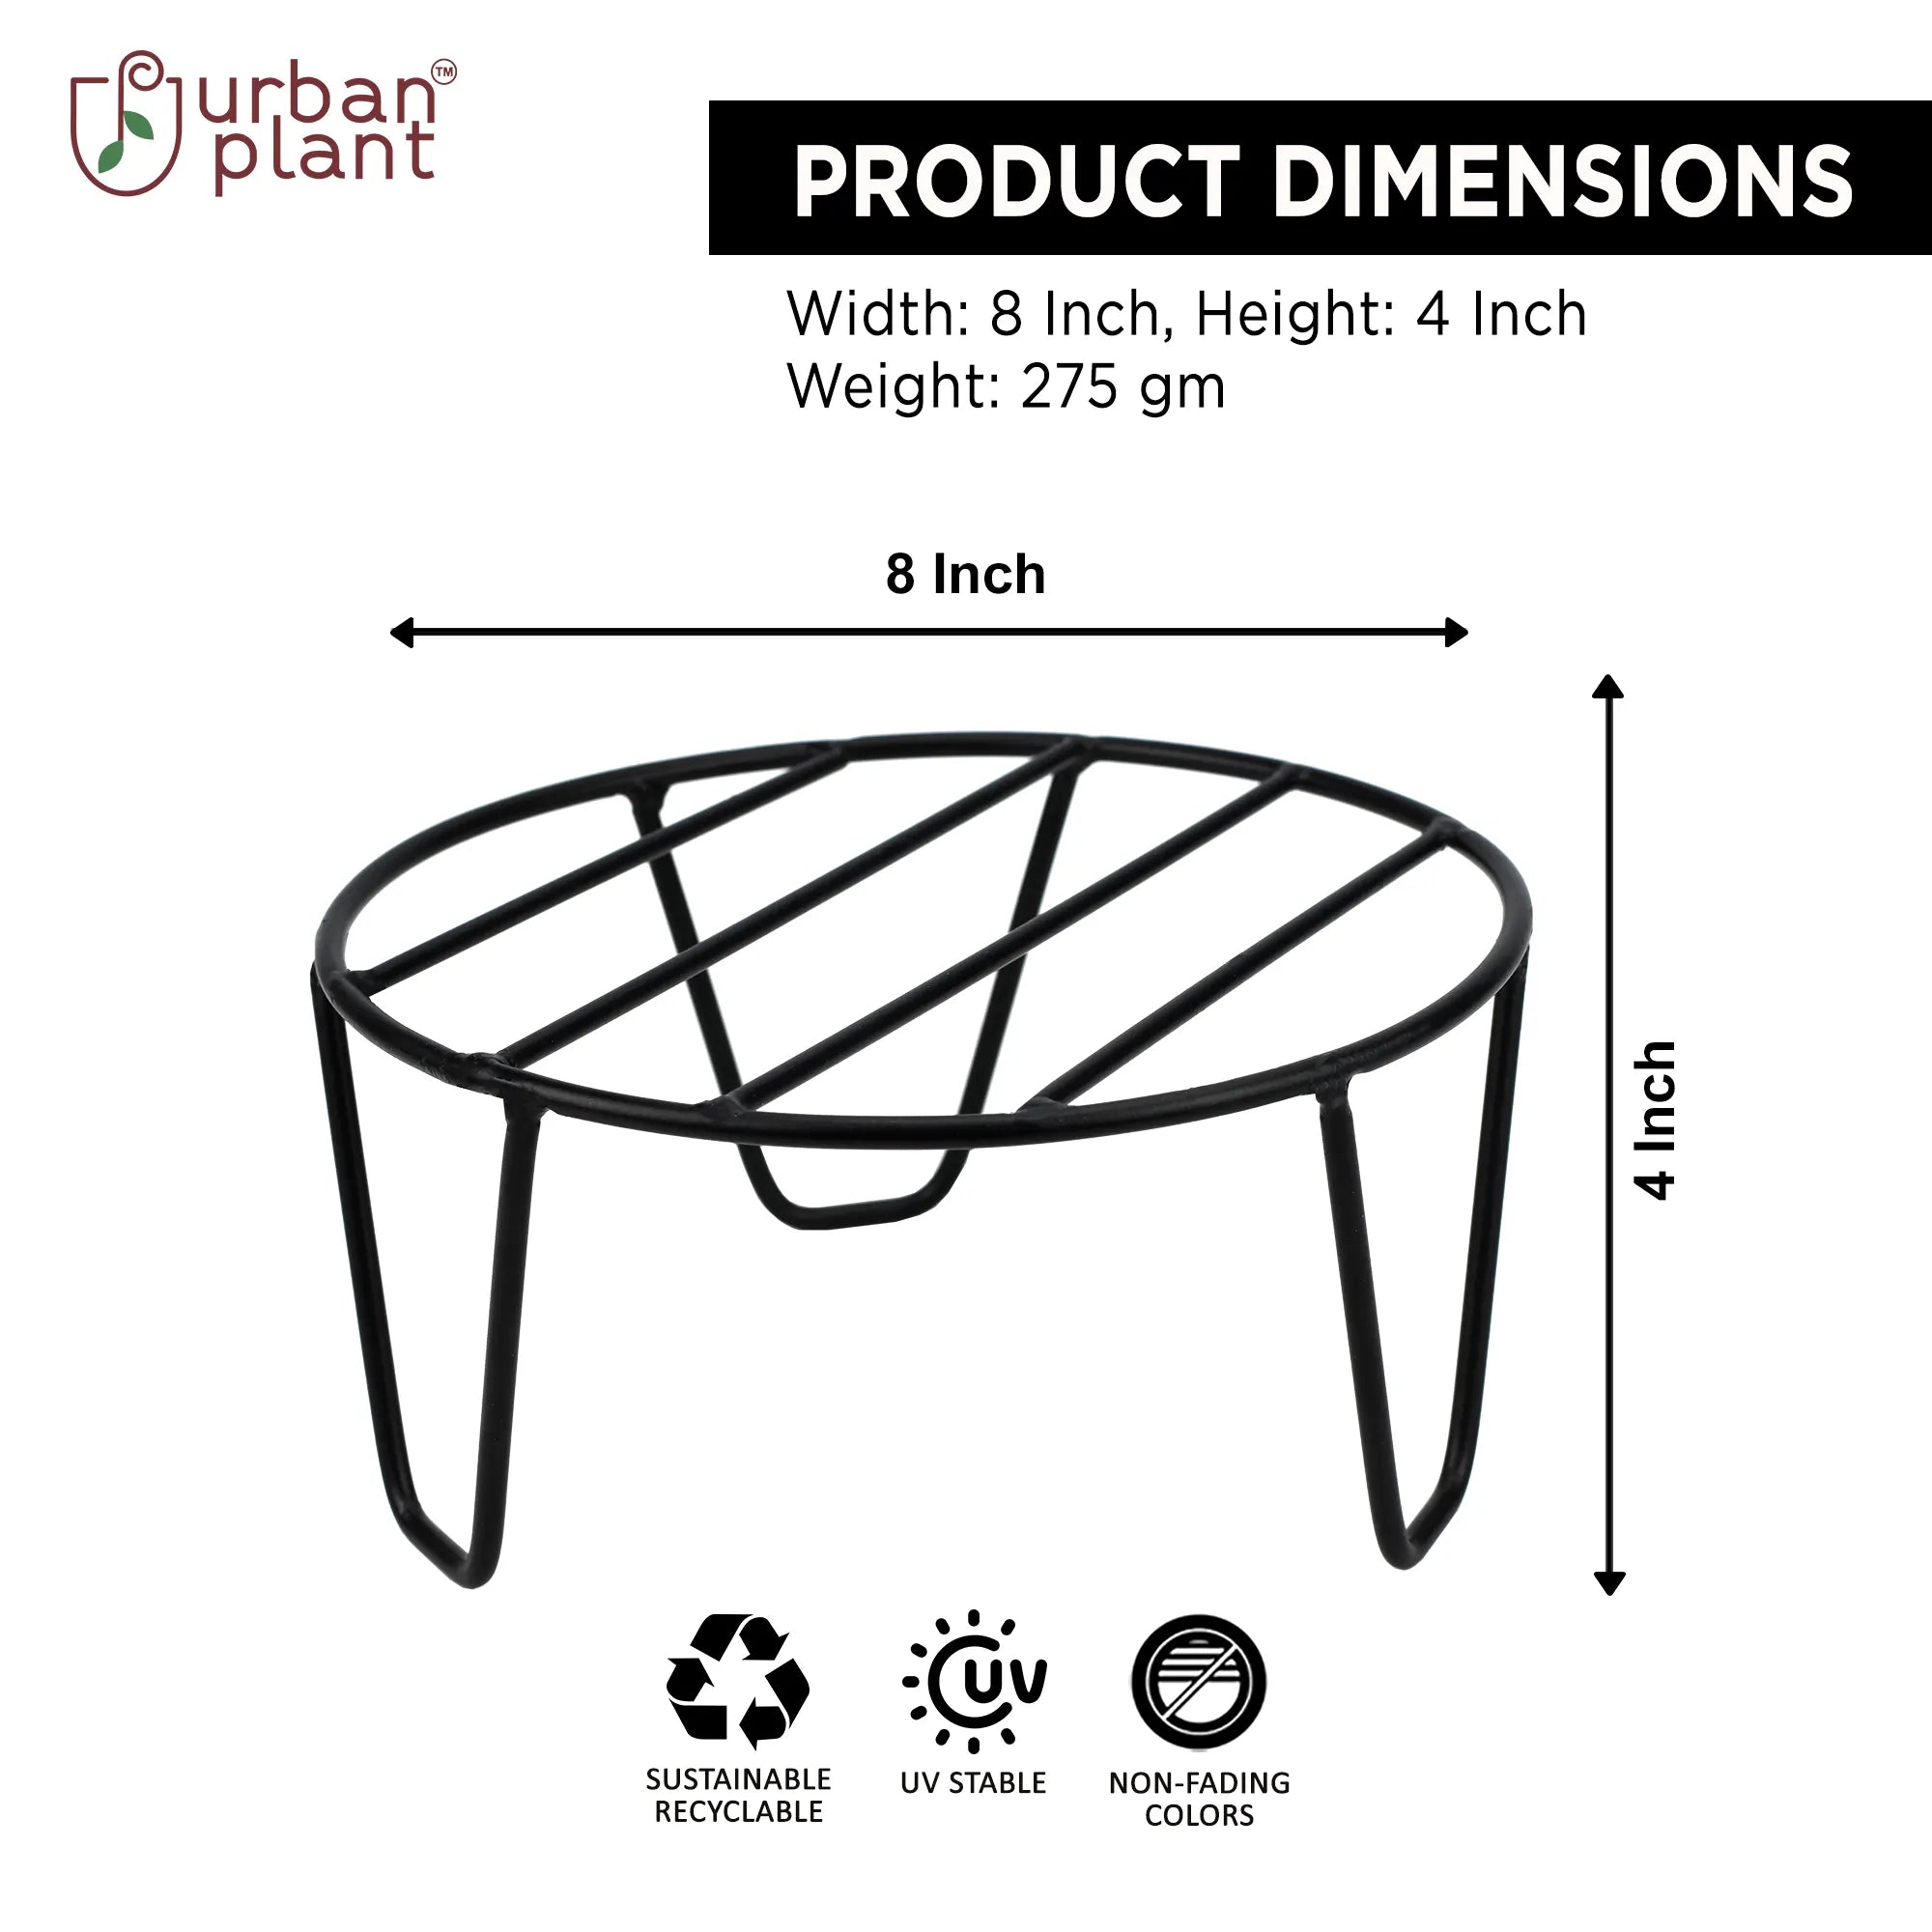 Urban Plant Durable Easy Pot Stand (1171) Pot Stand Urban Plant 